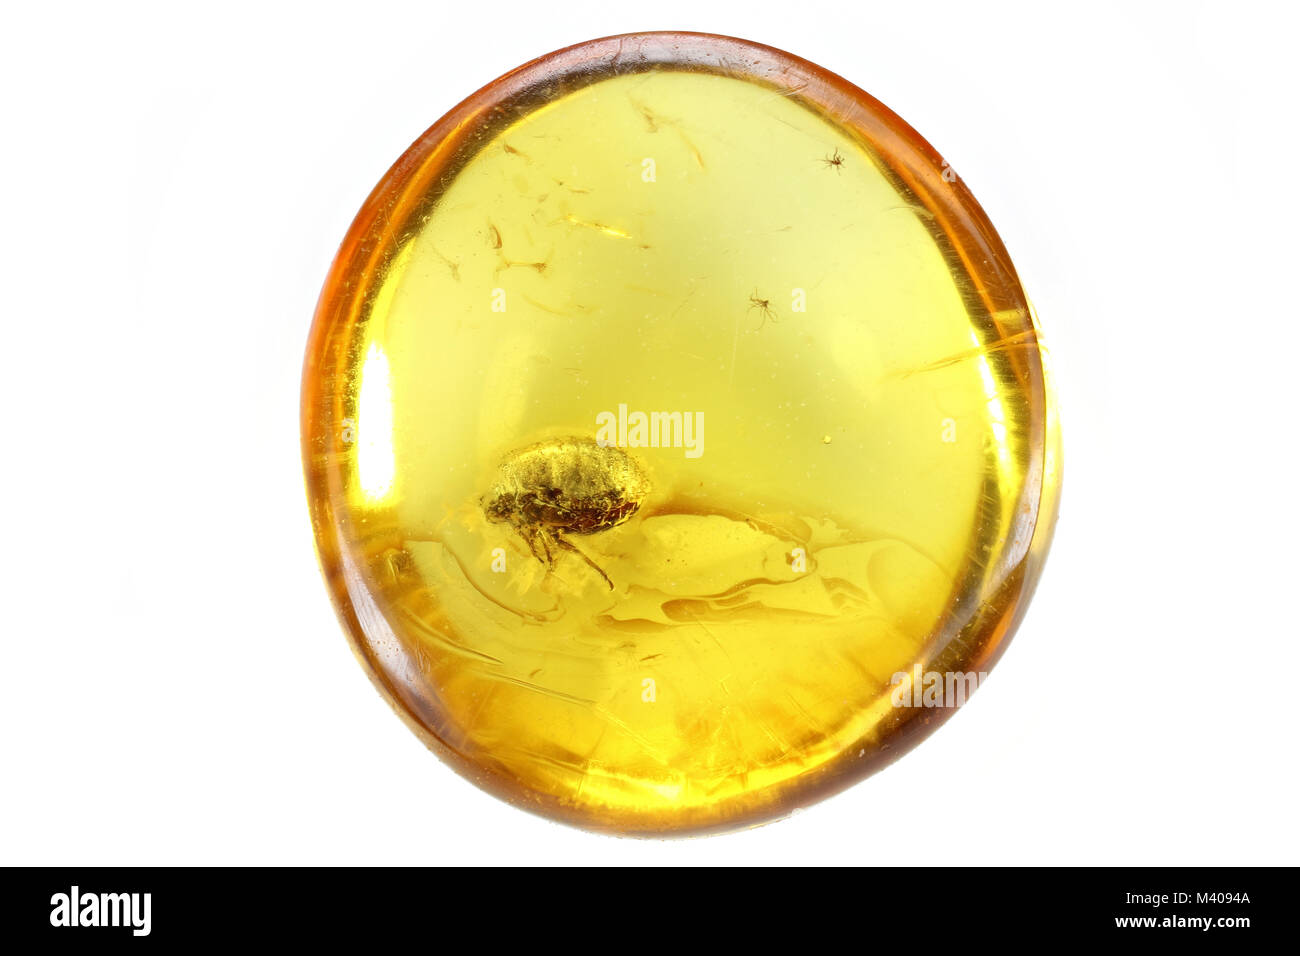 Baltic amber with aphid isolated on white background Stock Photo